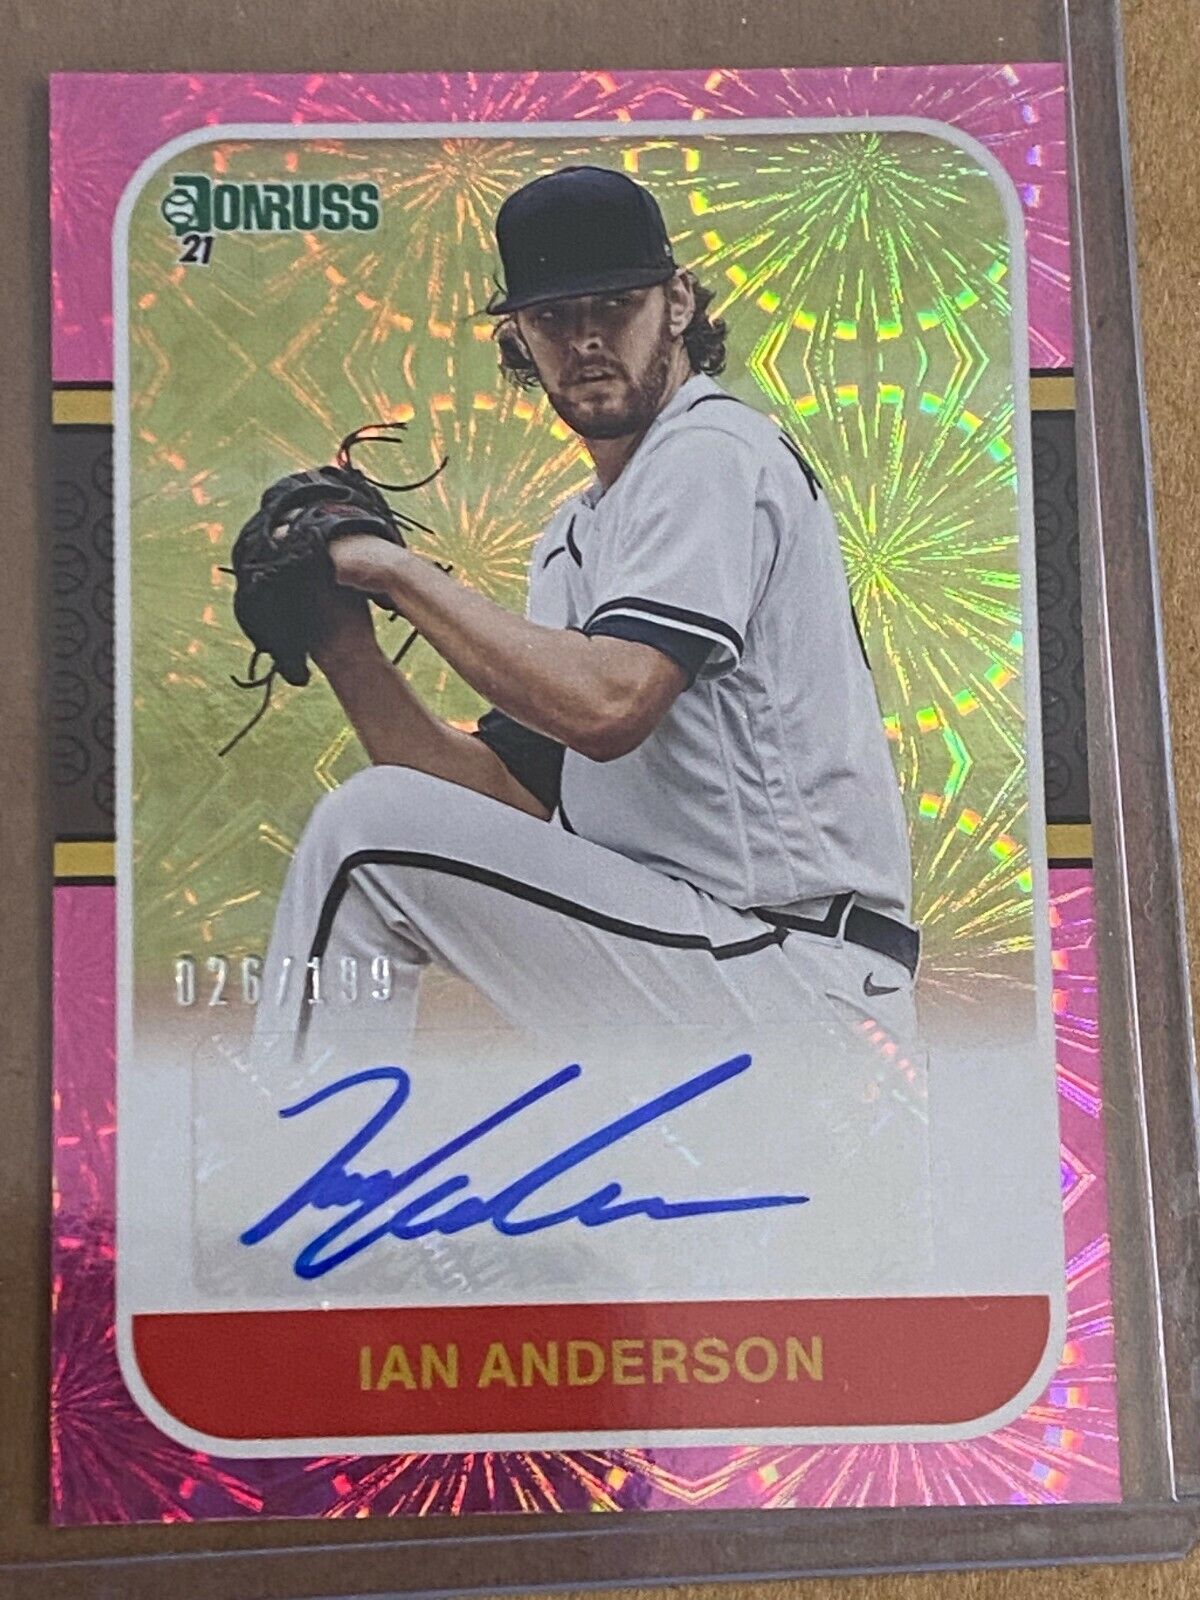 Ian Anderson 2021 Donruss Pink Fireworks Parallel Auto #d 026/199